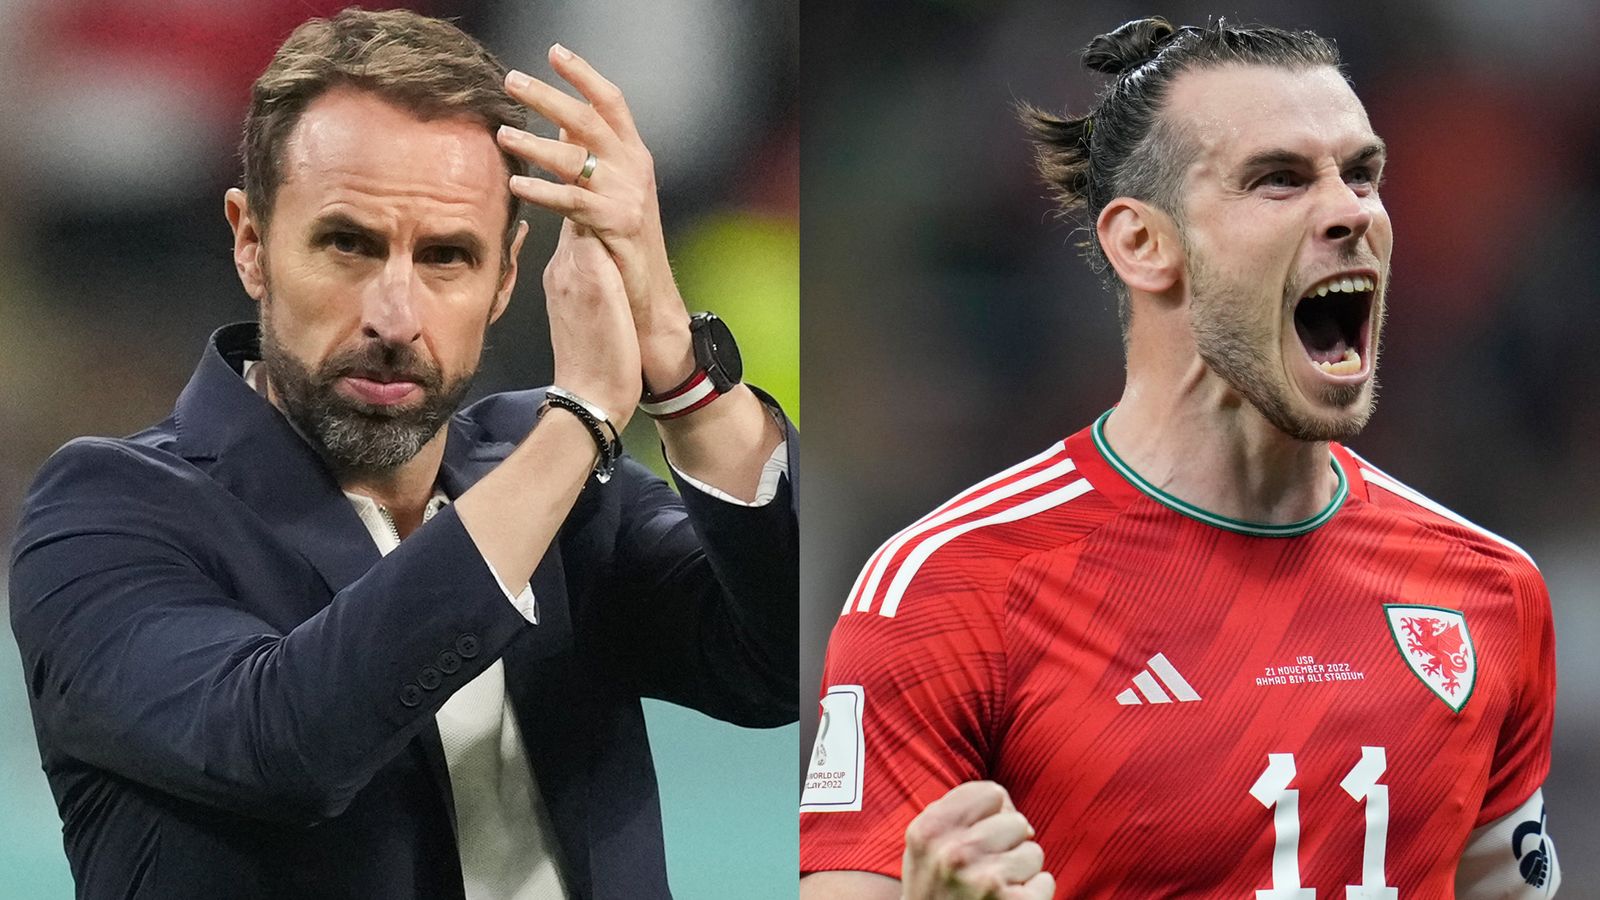 Gareth Southgate: England have to accept OneLove criticism and move on | Gareth Bale "not too happy" over armband